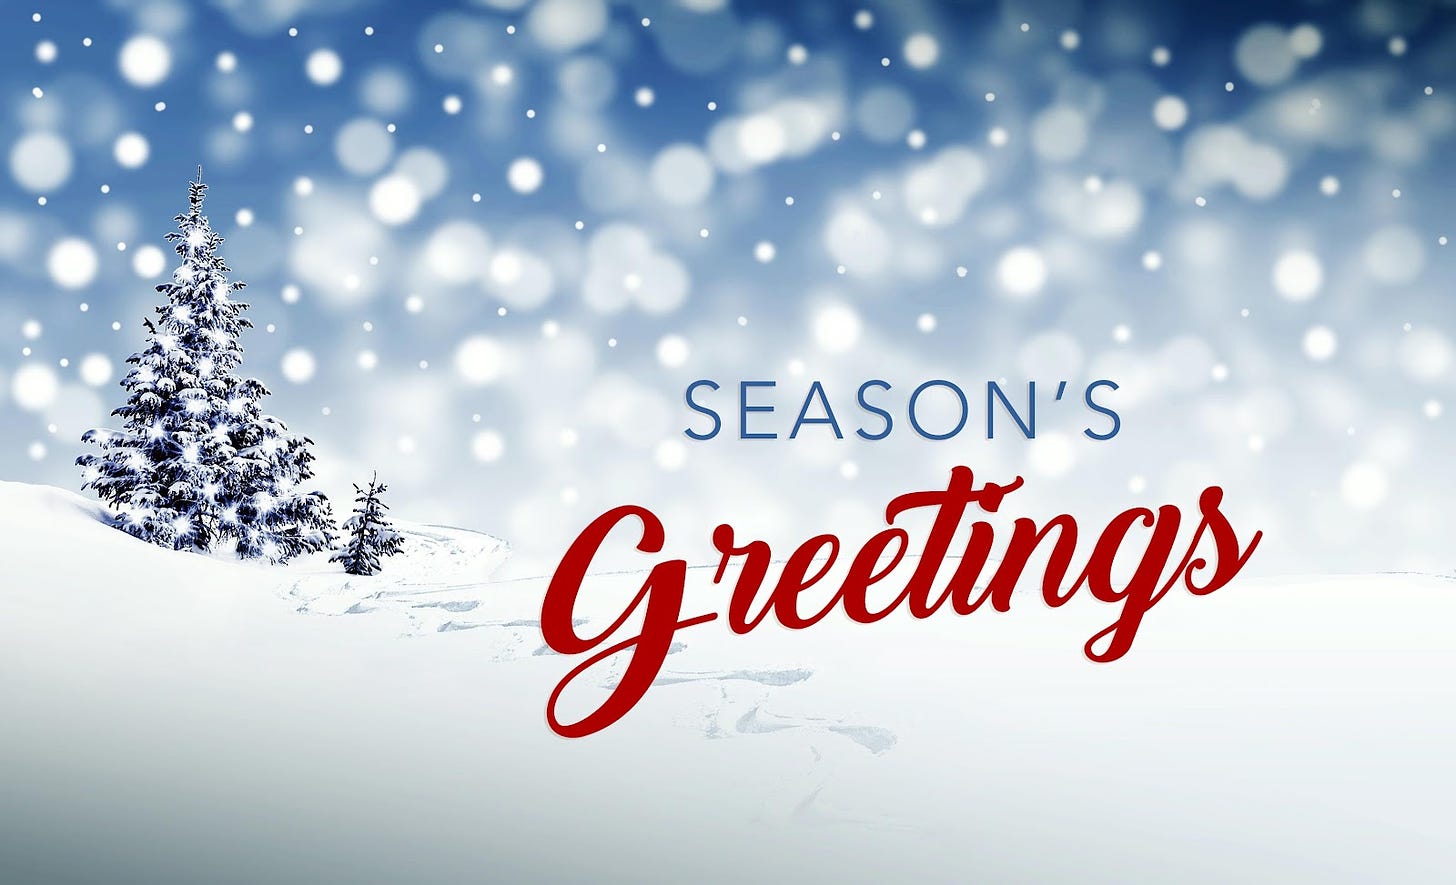 15 Season's Greetings Cards Stock Images, HD Wallpapers & Winter ...